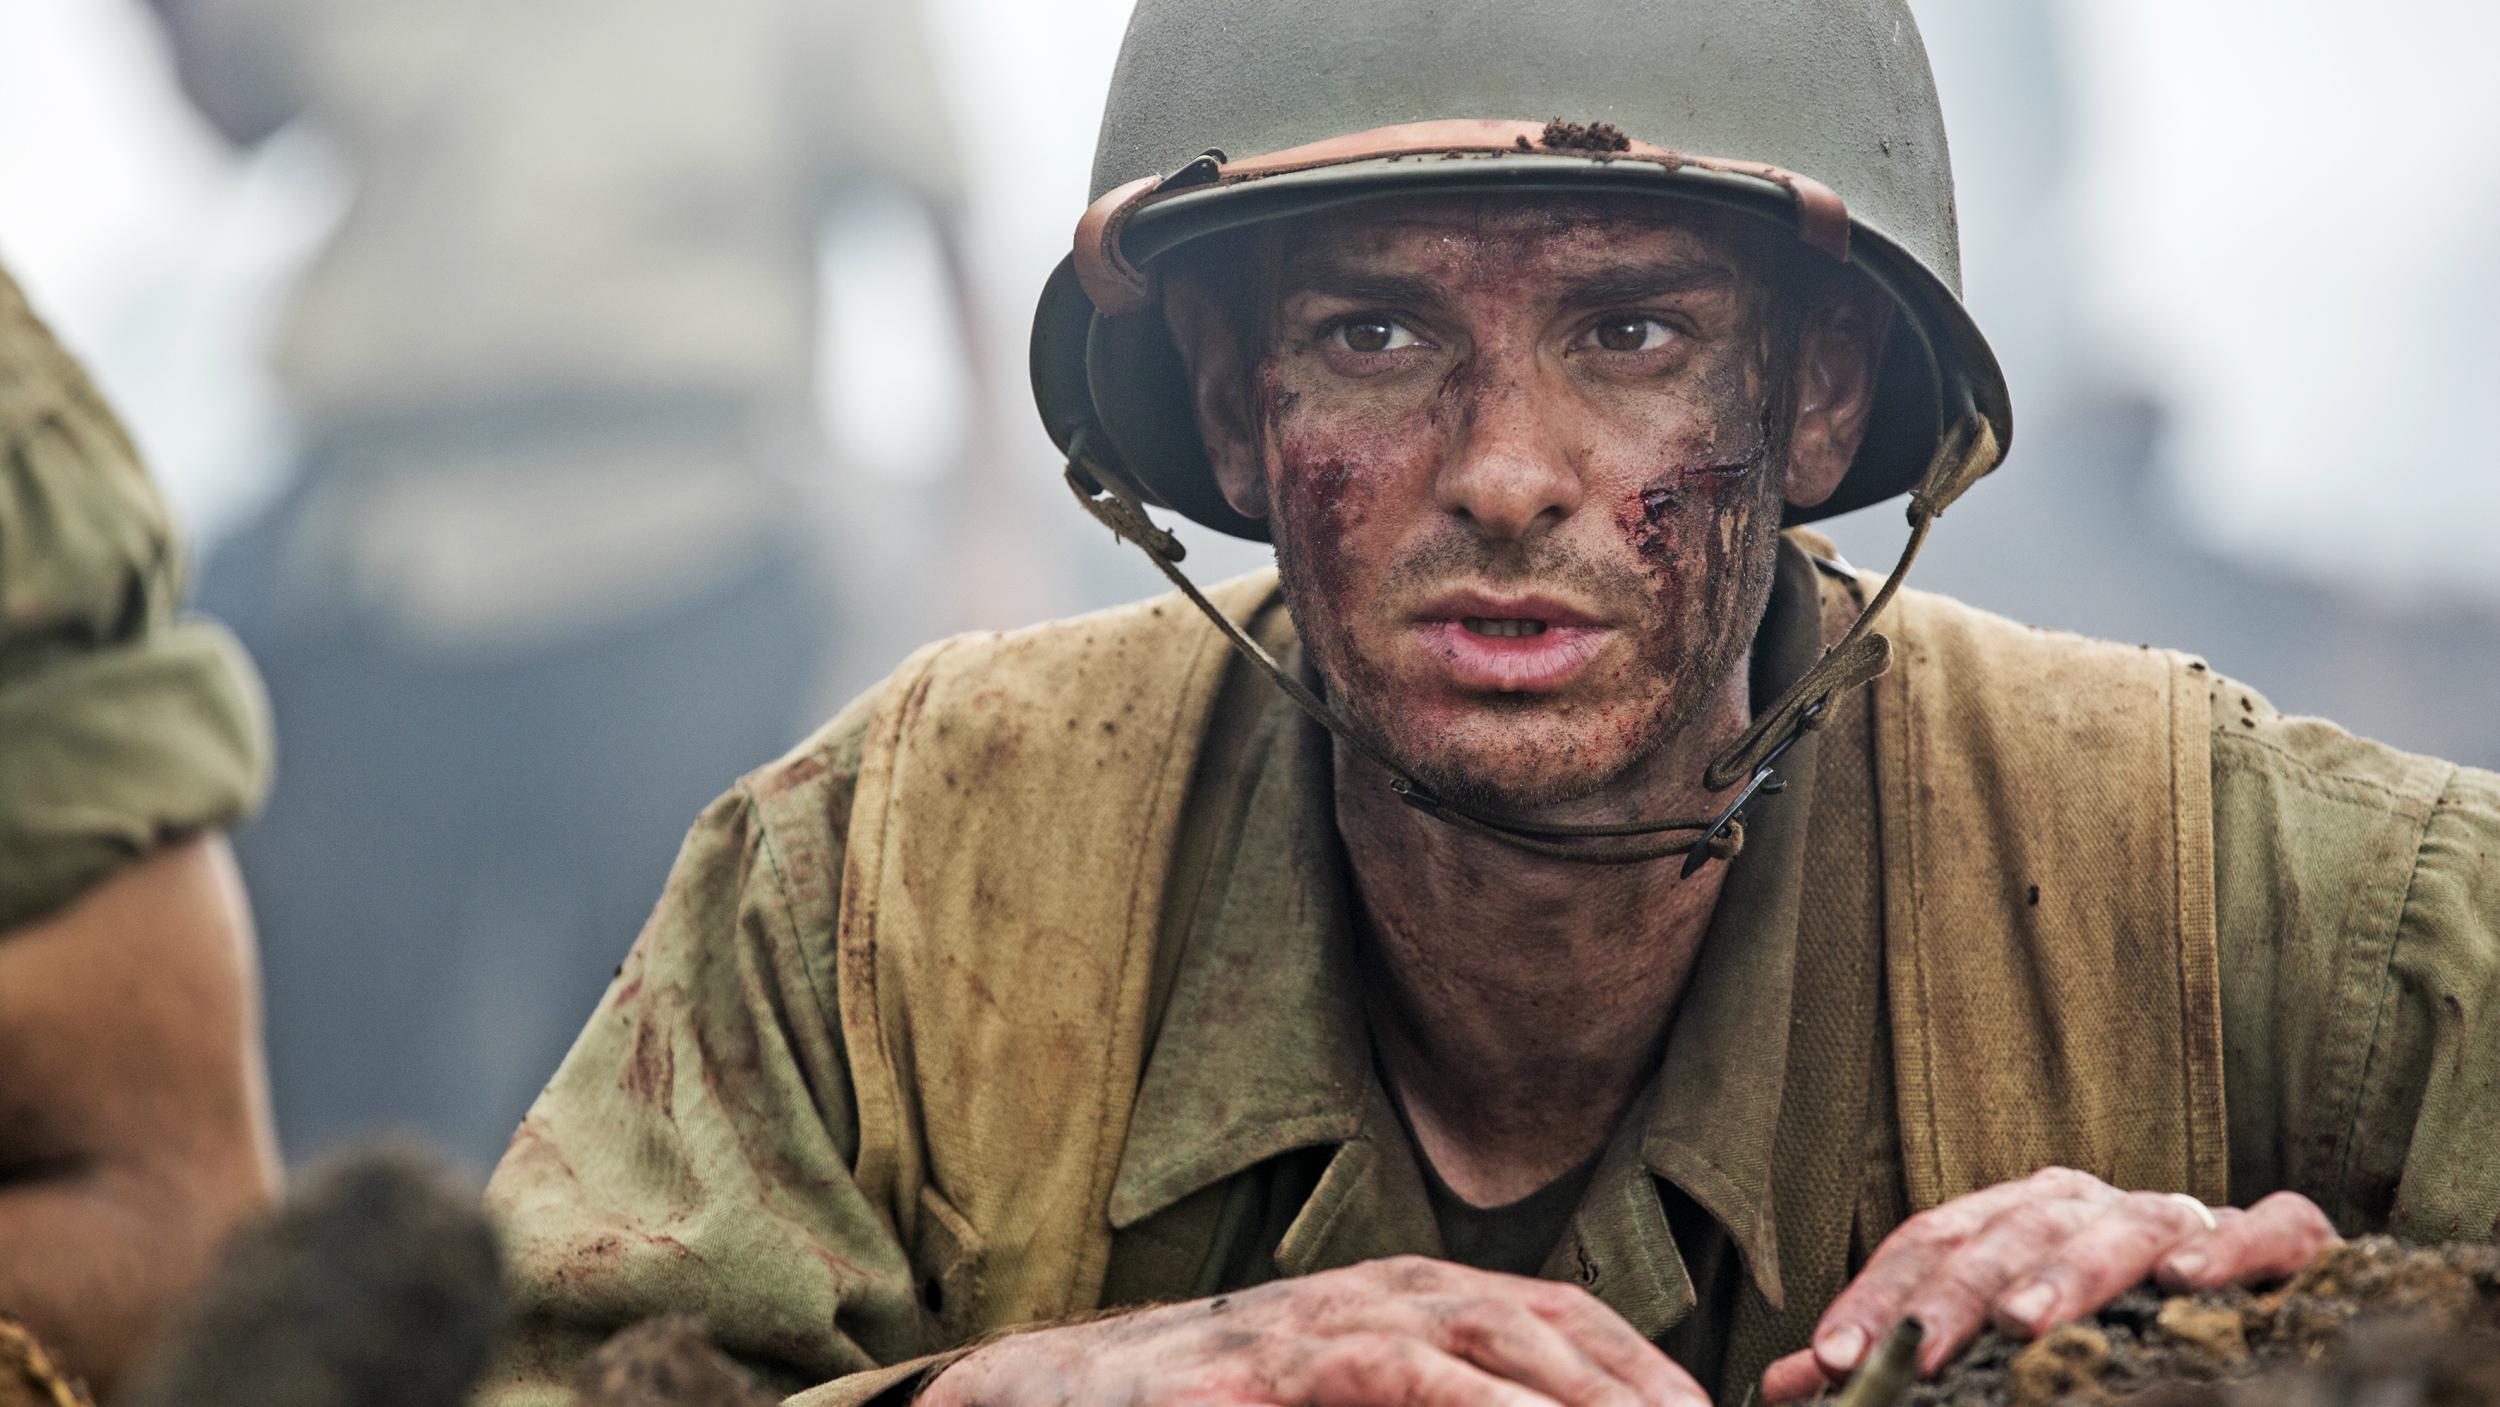 Andrew Garfield has been nominated for a Bafta for his portrayal of Doss in this cinematic tribute